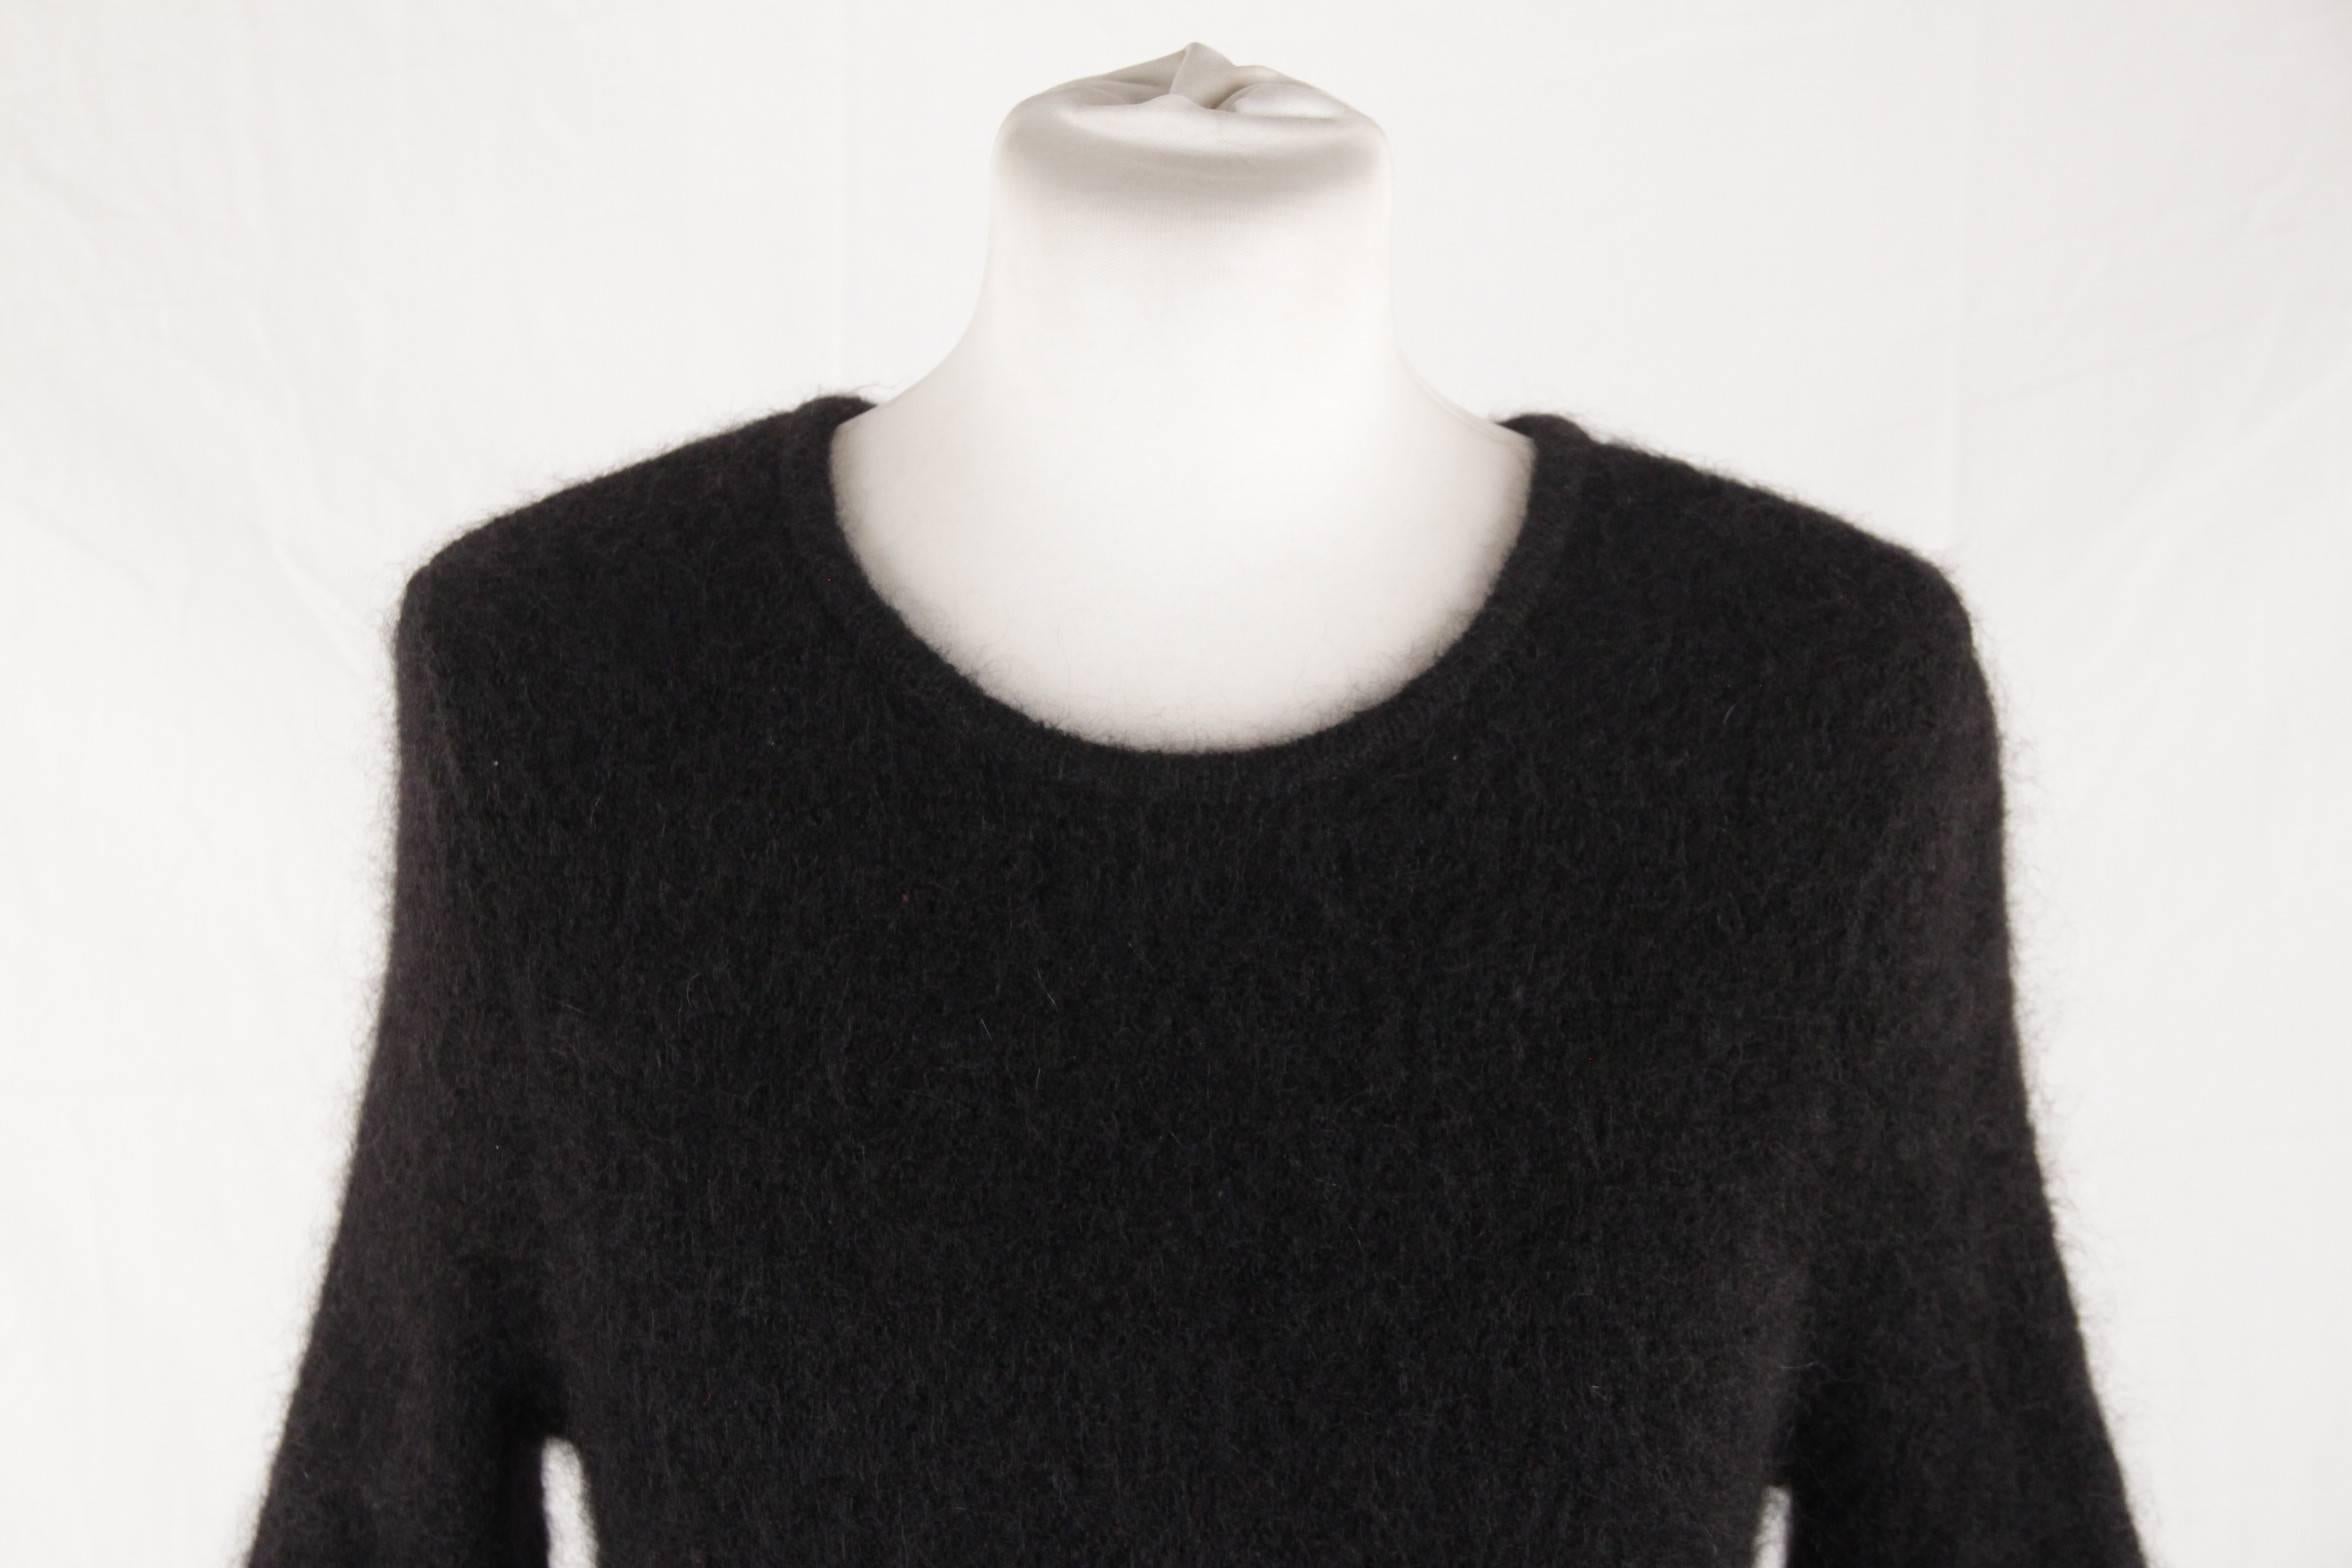 - Black Chanel long sleeve mohair dress
- From CHANEL 2009 Fall Collection
- Round neckline
- Undulating sheer knit cuffs and skirt hemlines.
- Asymmetrical hem
- Key hole with button closure at back
- 1 sparkly black button showing the Chanel